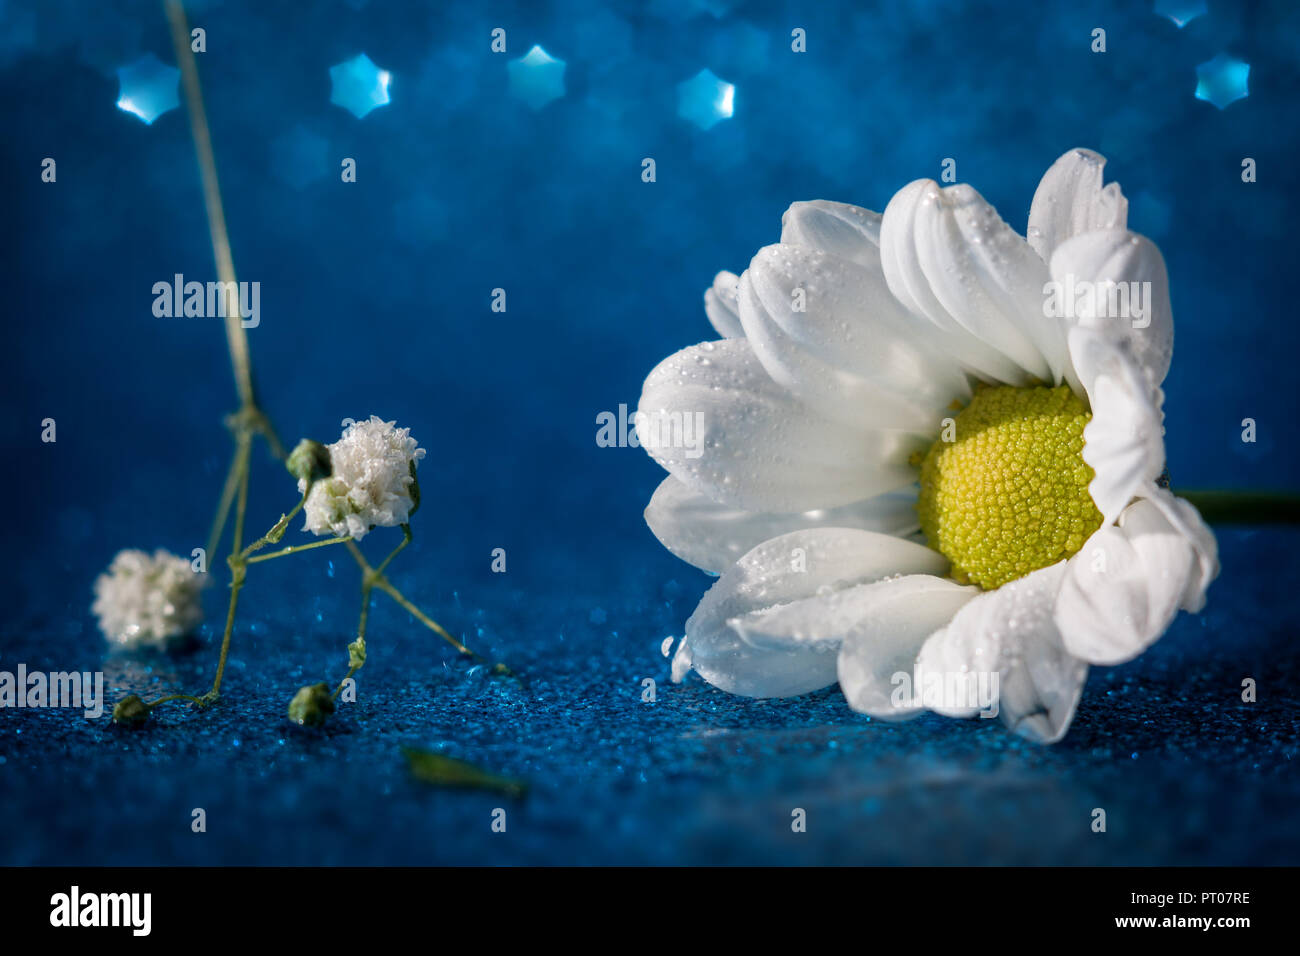 Macro shot of flowers on a blue background Stock Photo